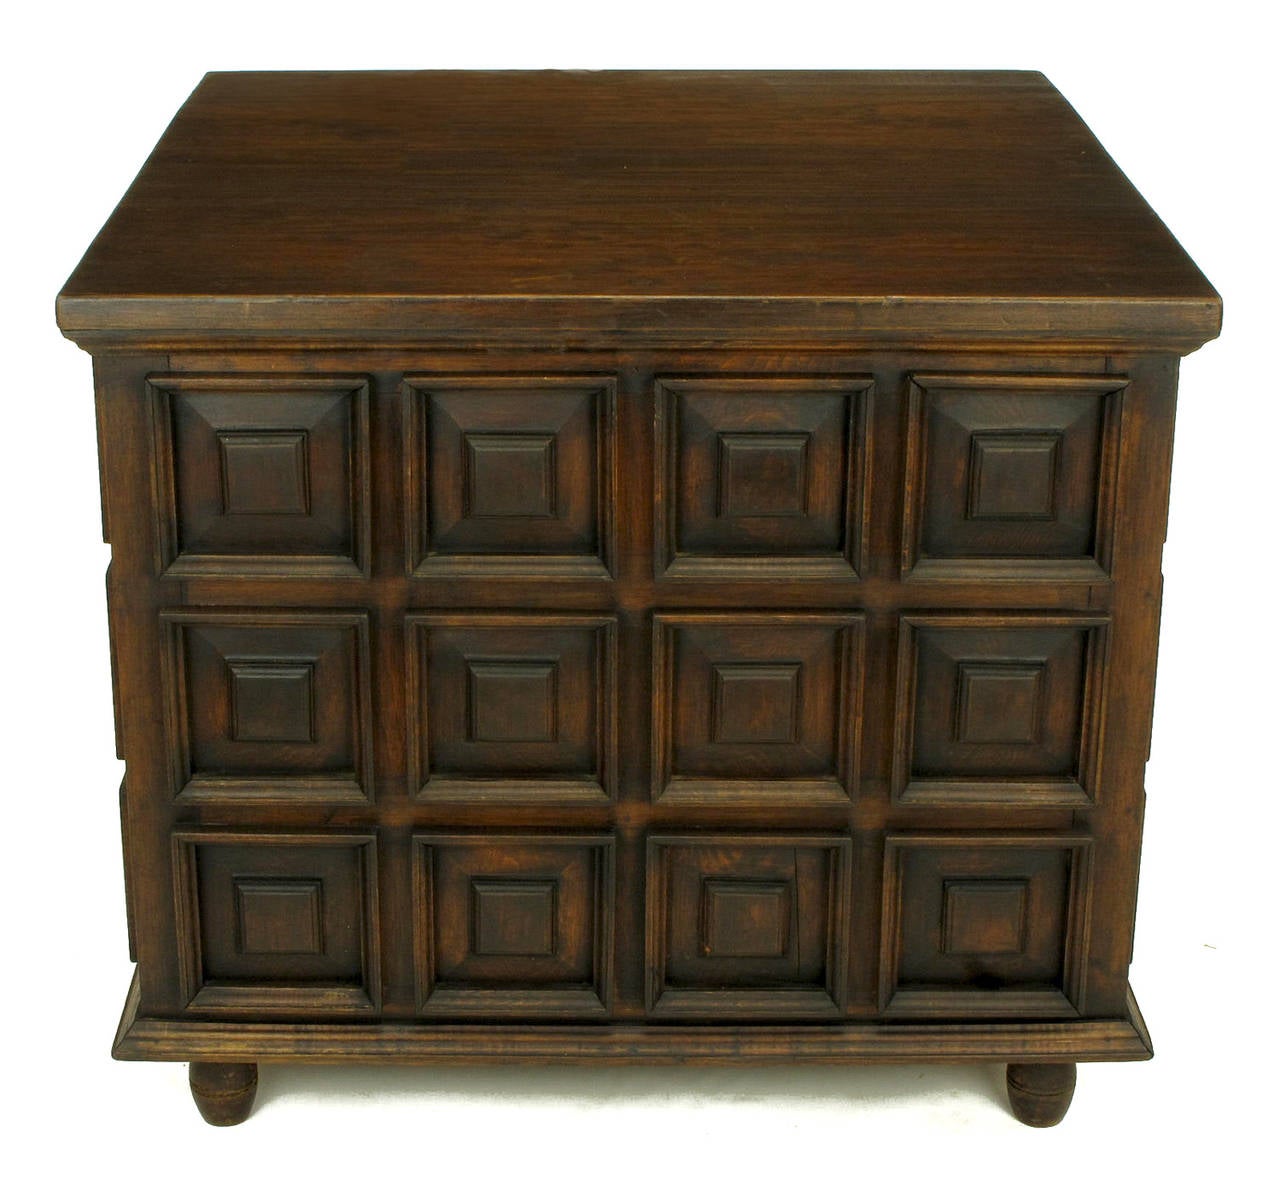 Iron Artisan Handcrafted Artes De Mexico Three-Drawer Commode For Sale